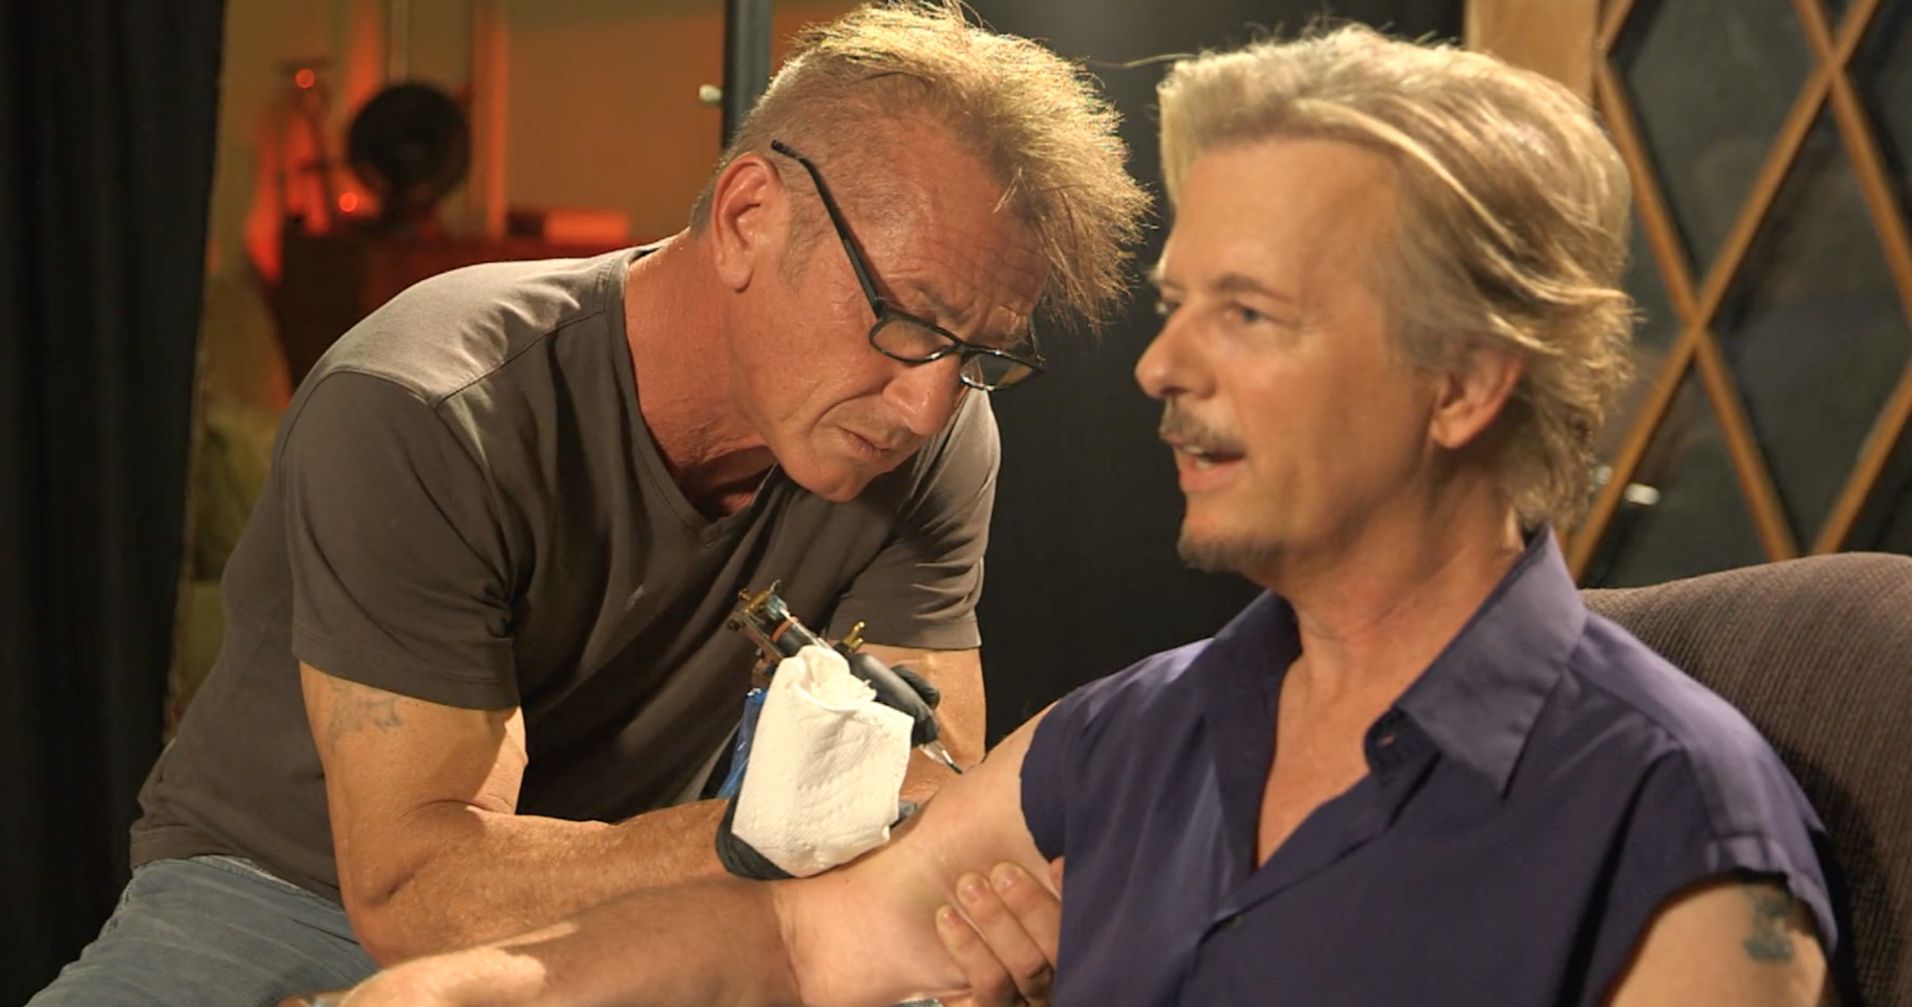 Watch David Spade Get His 2nd Tattoo from Sean Penn in Honor of Chris Farley